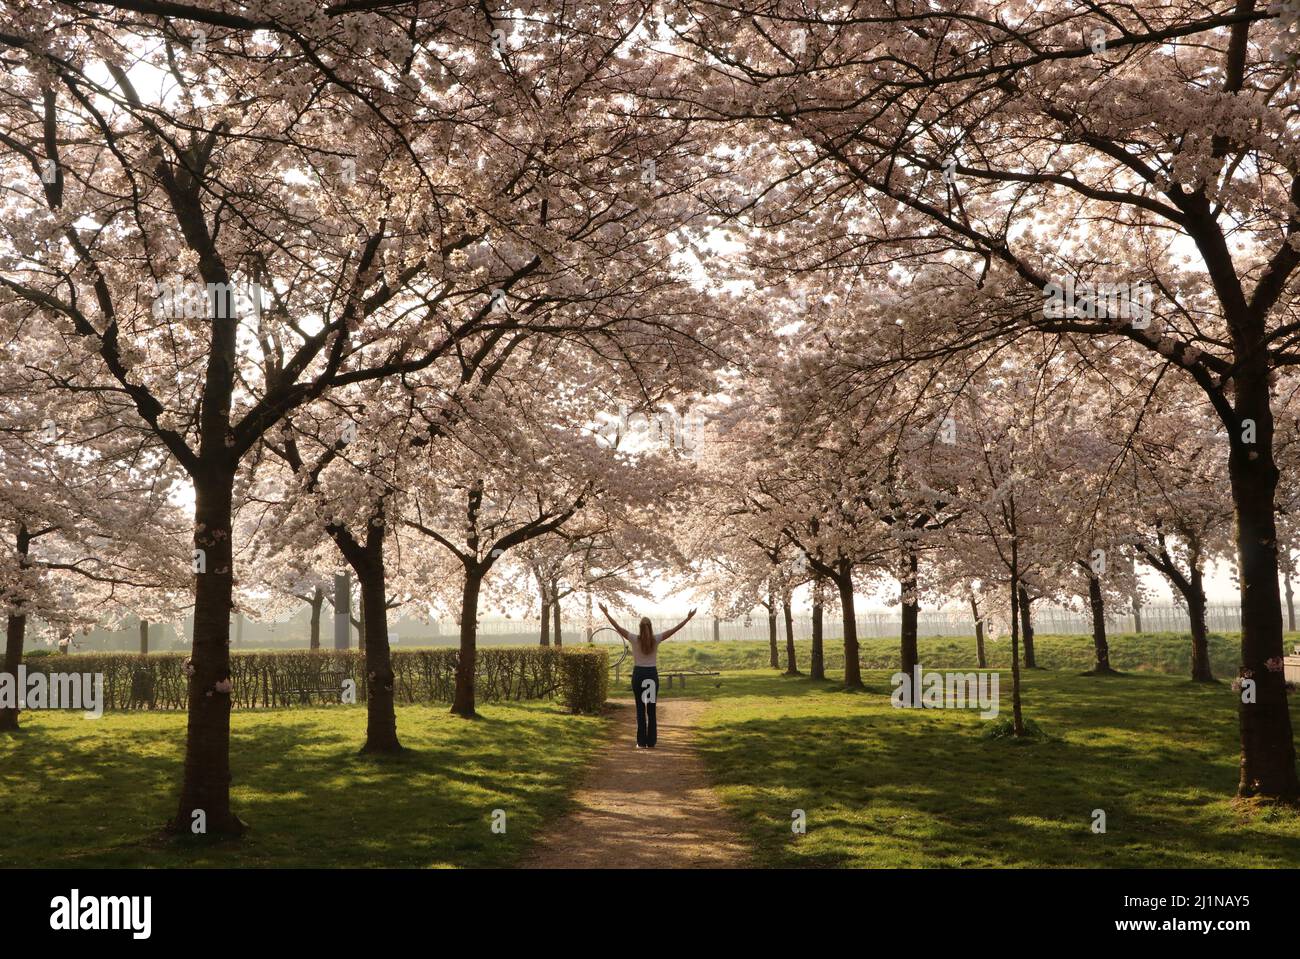 japanese cherry blossom trees in park with woman standing between them Stock Photo